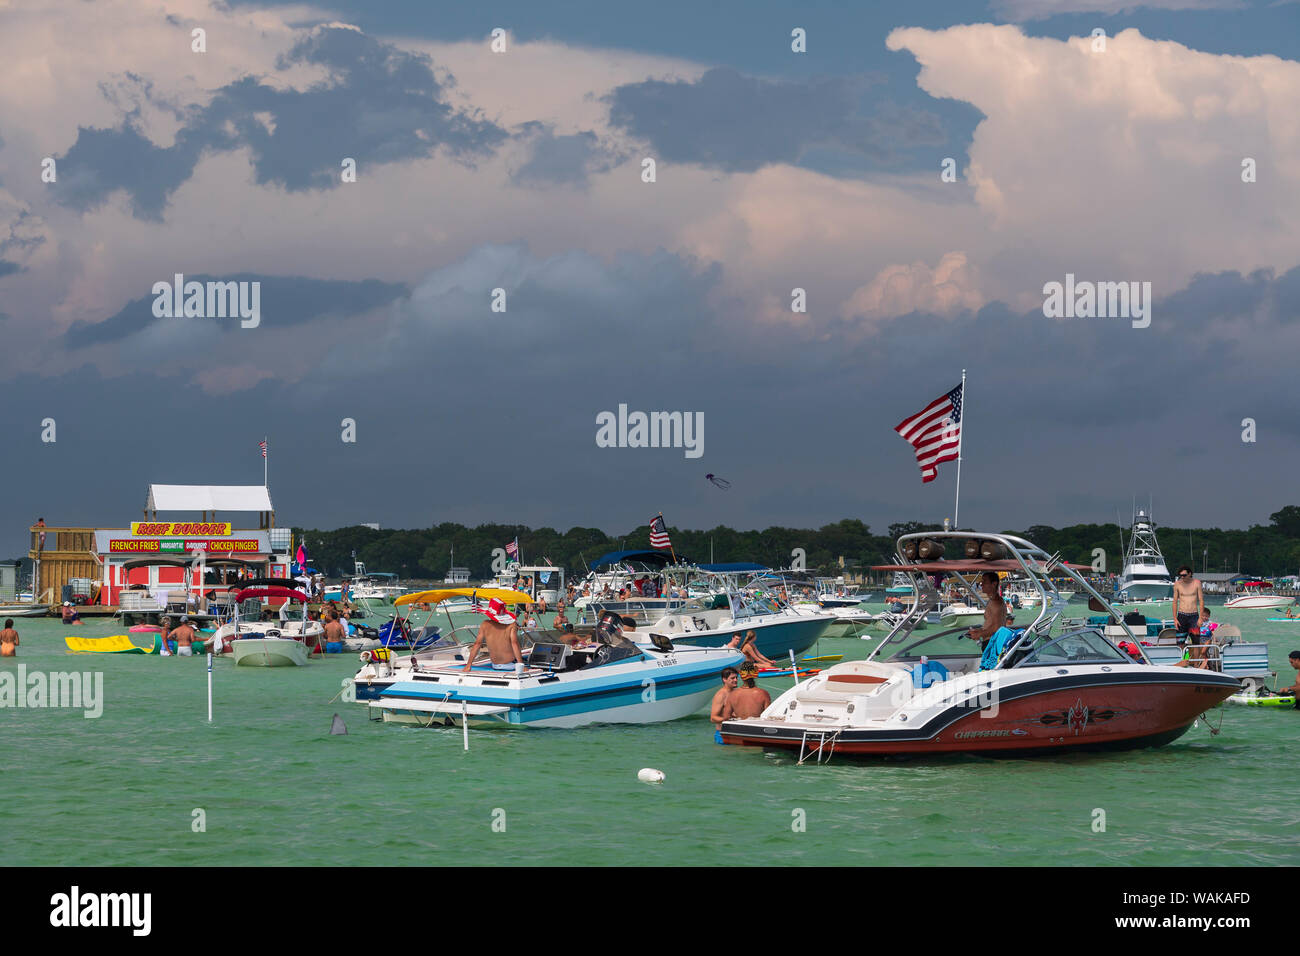 Boaters and food stands floating on the water to celebrate Billy Bowl Legs in Fort Walton Beach, Florida Stock Photo